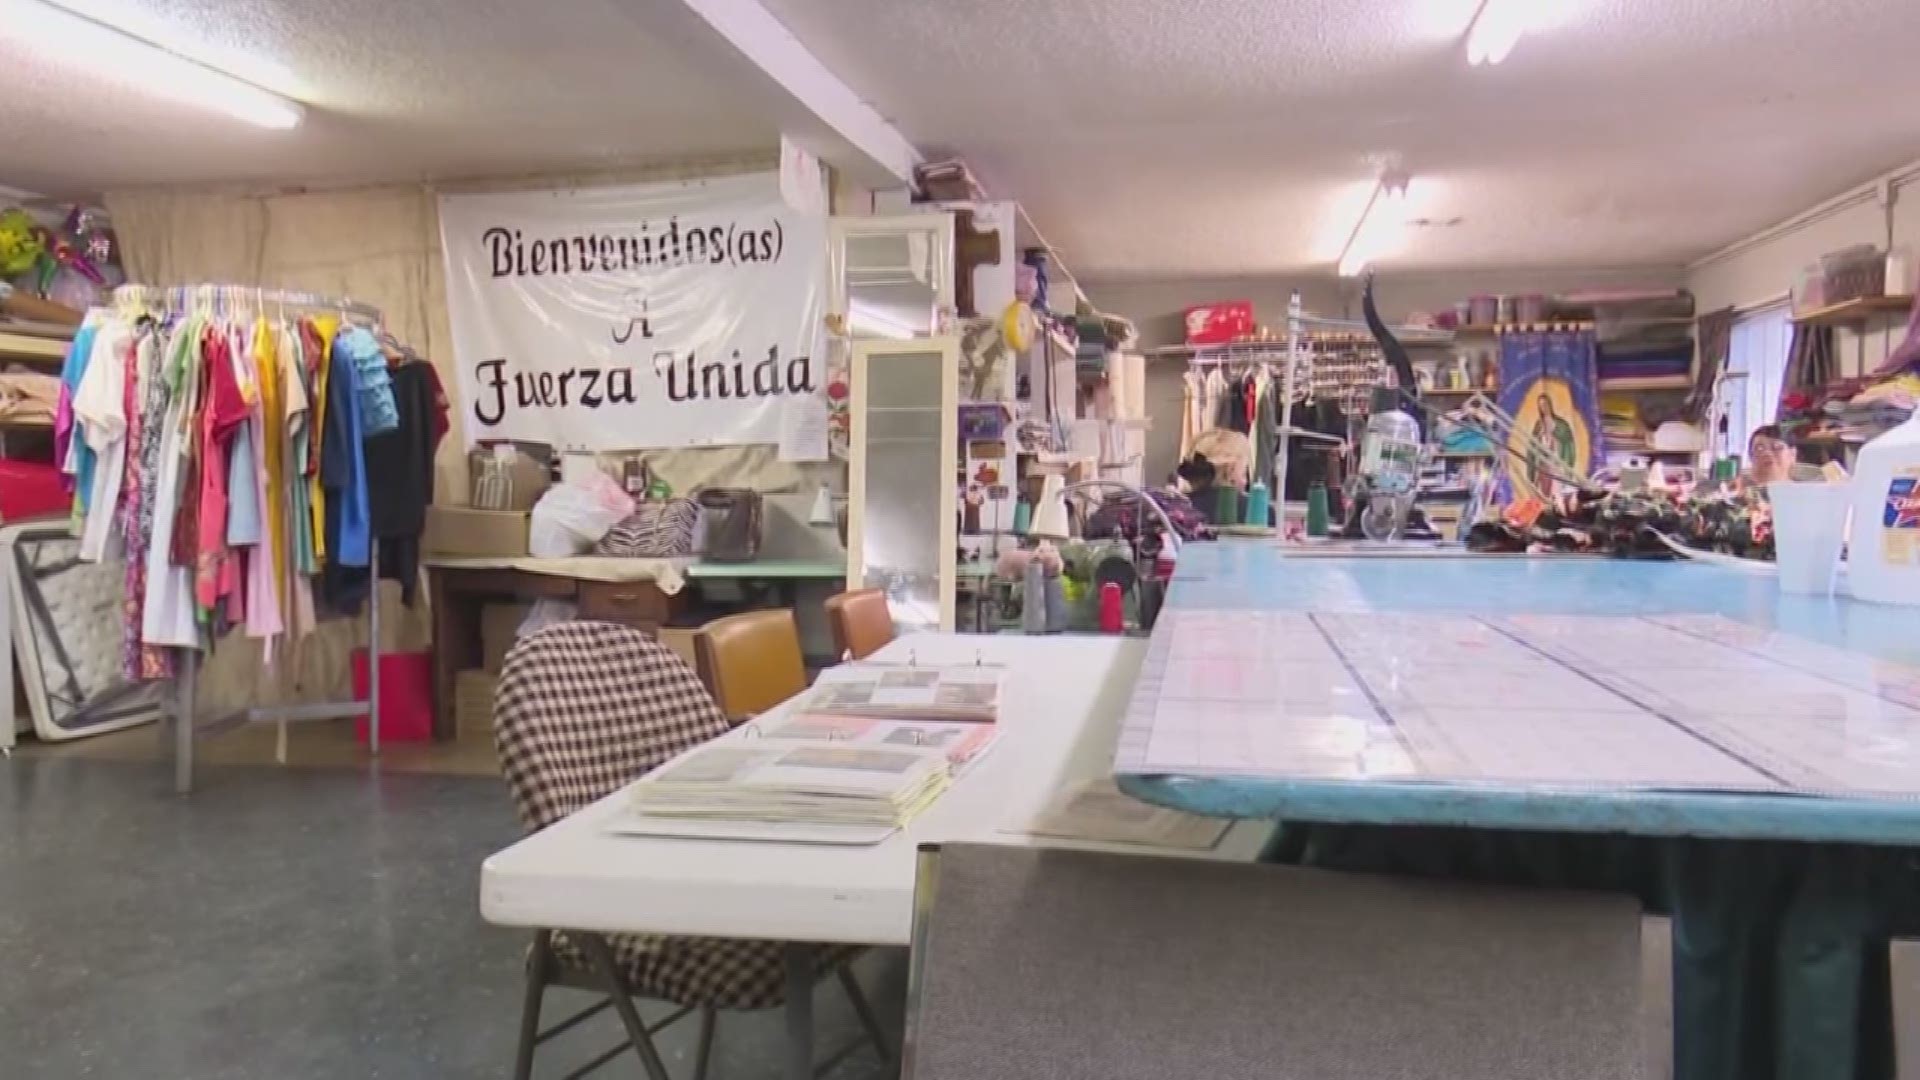 Local seamstresses from the shop Fuerza Unida are united in community and clothing.